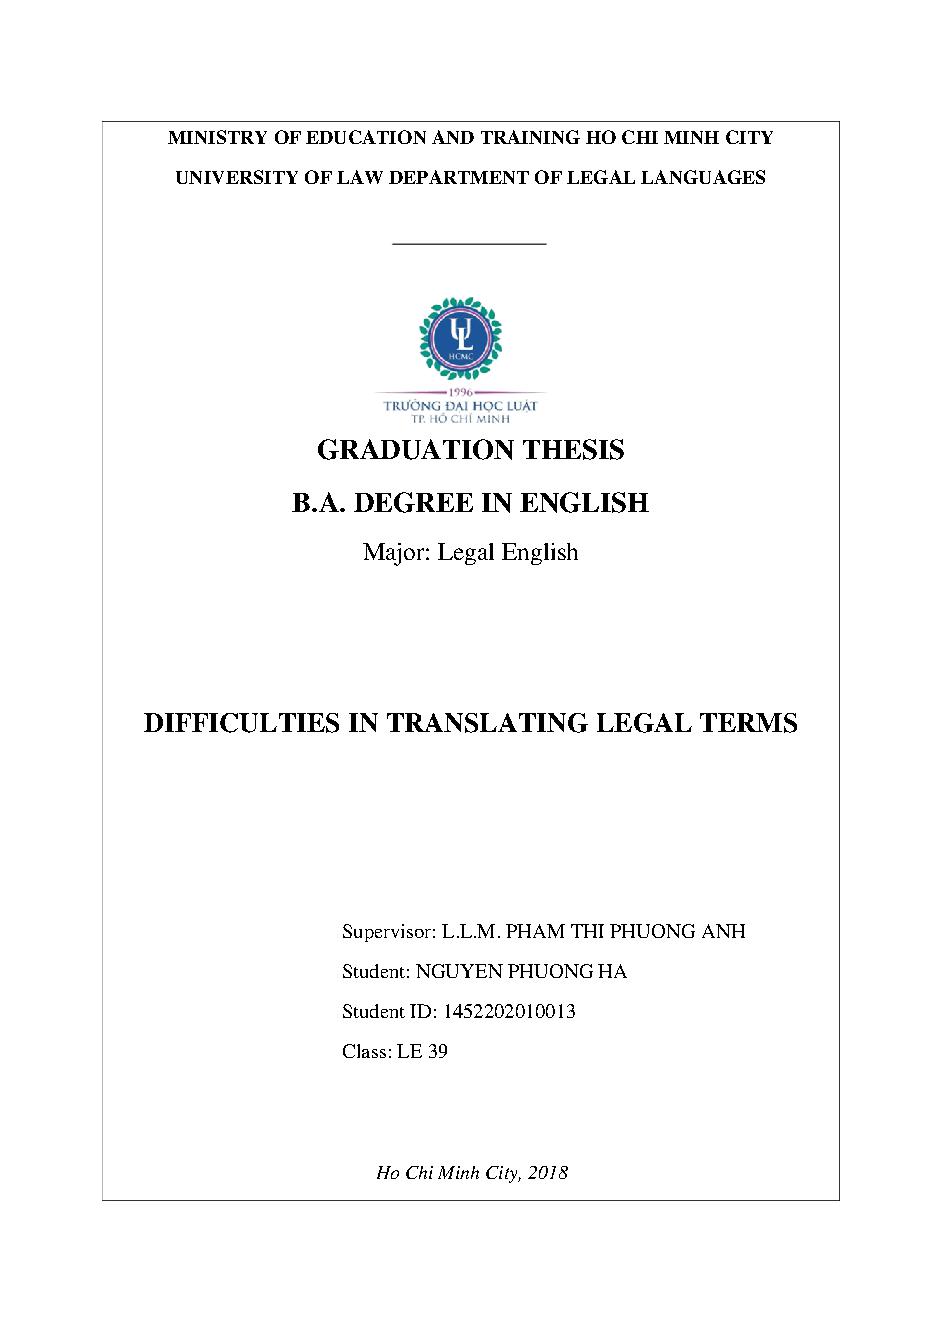 Difficulties in translating legal terms